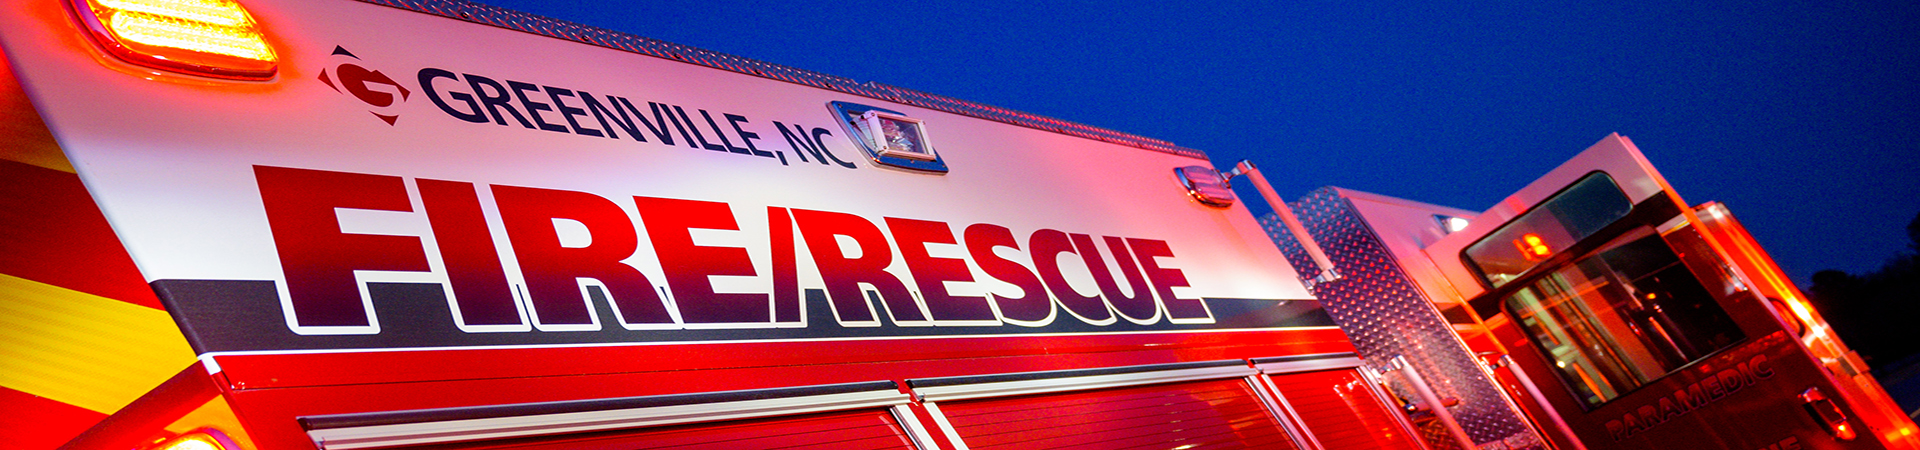 Fire Rescue Truck Banner Image